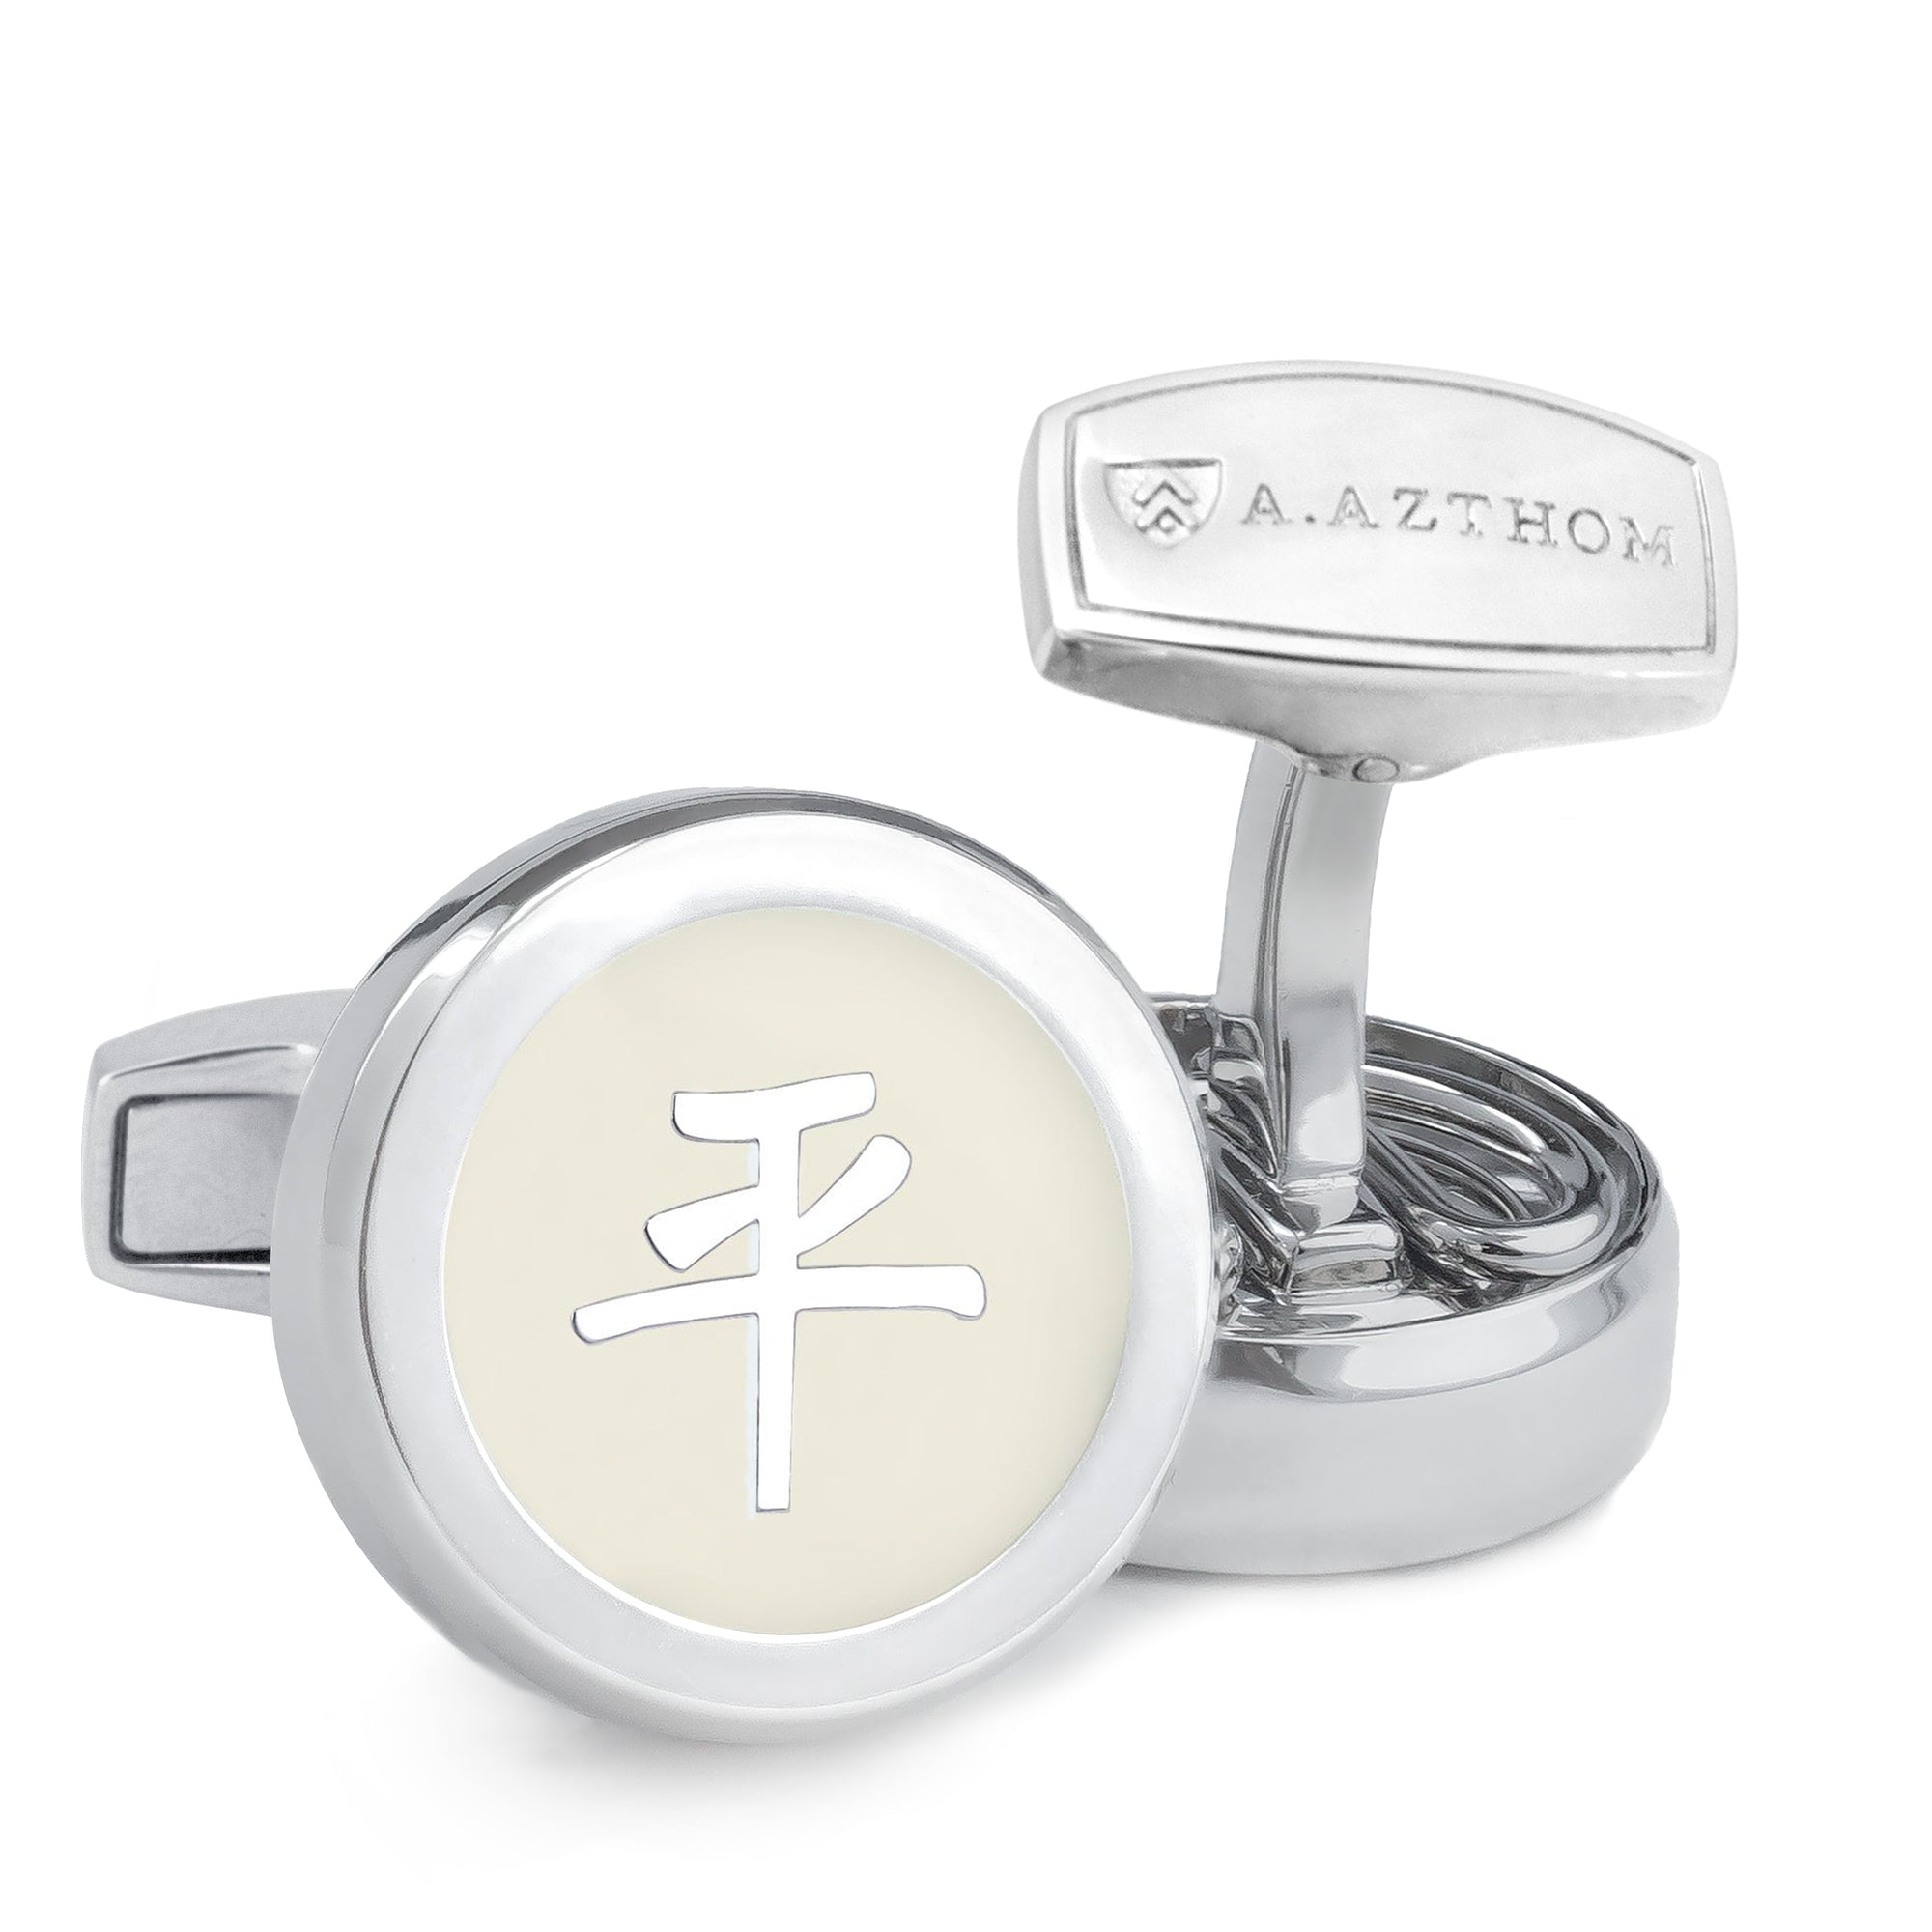 Chinese Character Silver Cufflinks with Clip-on Button Covers-Cufflinks.com.sg